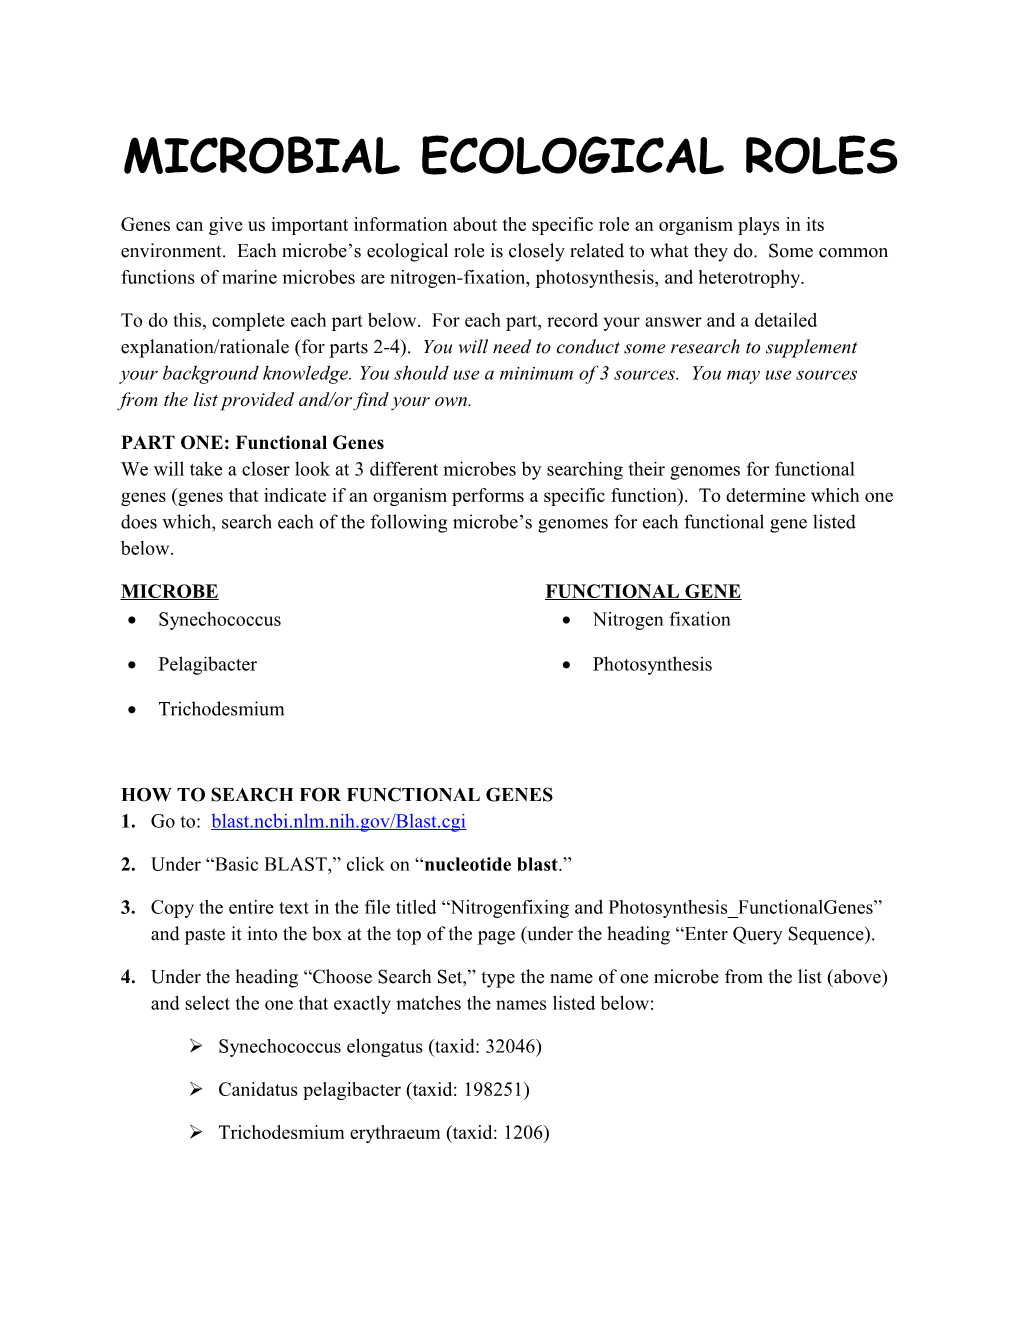 Microbial Ecological Roles